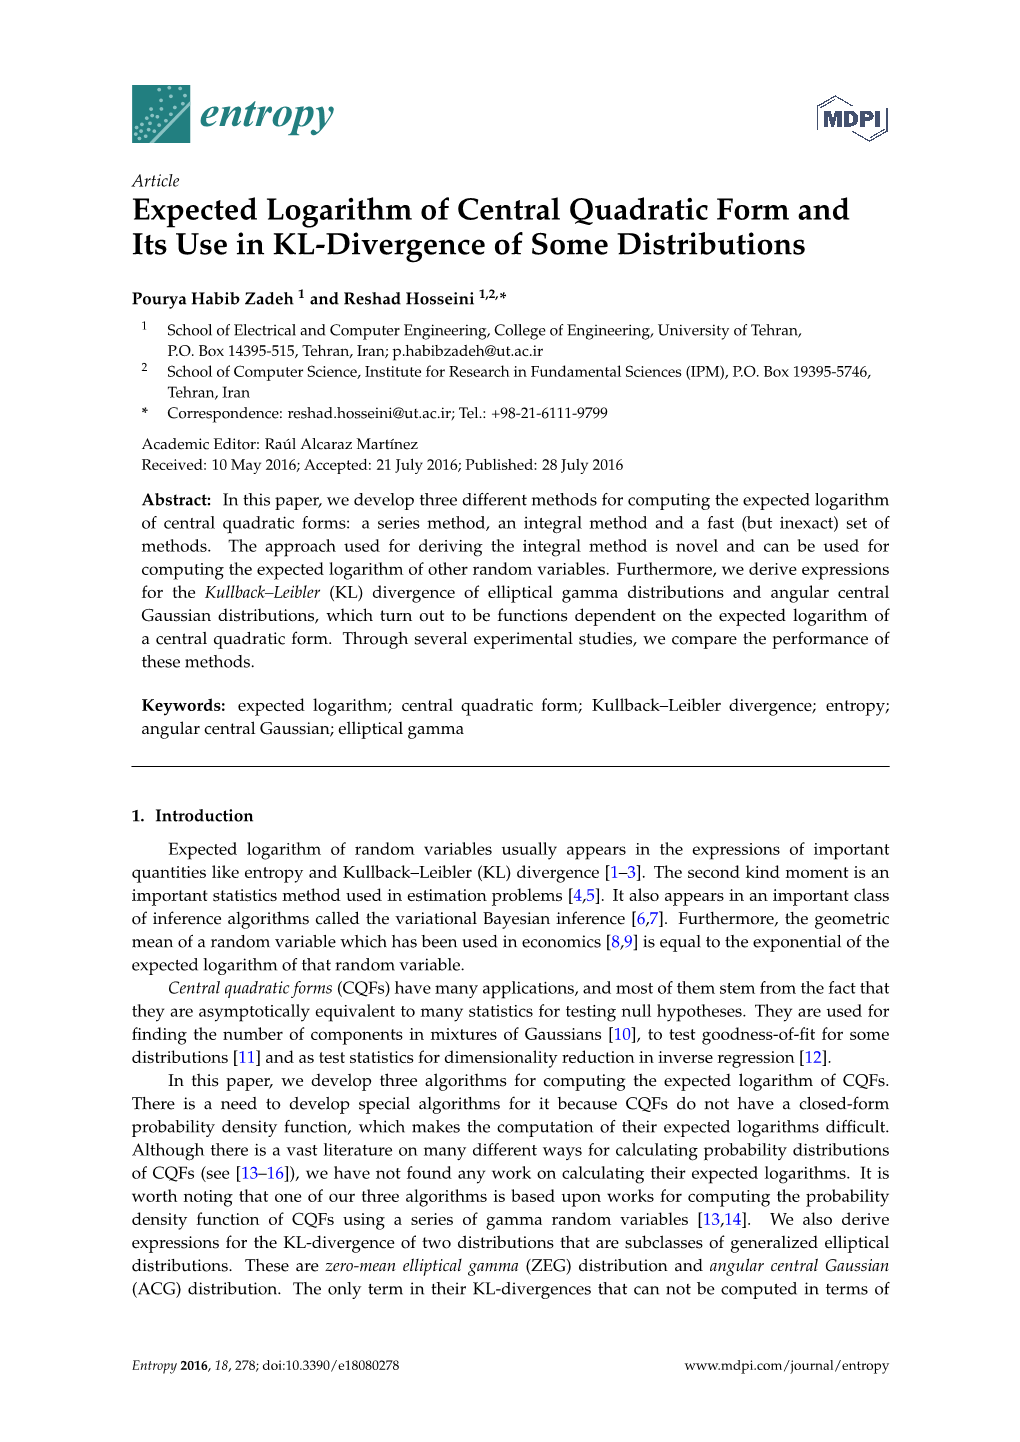 Expected Logarithm of Central Quadratic Form and Its Use in KL-Divergence of Some Distributions